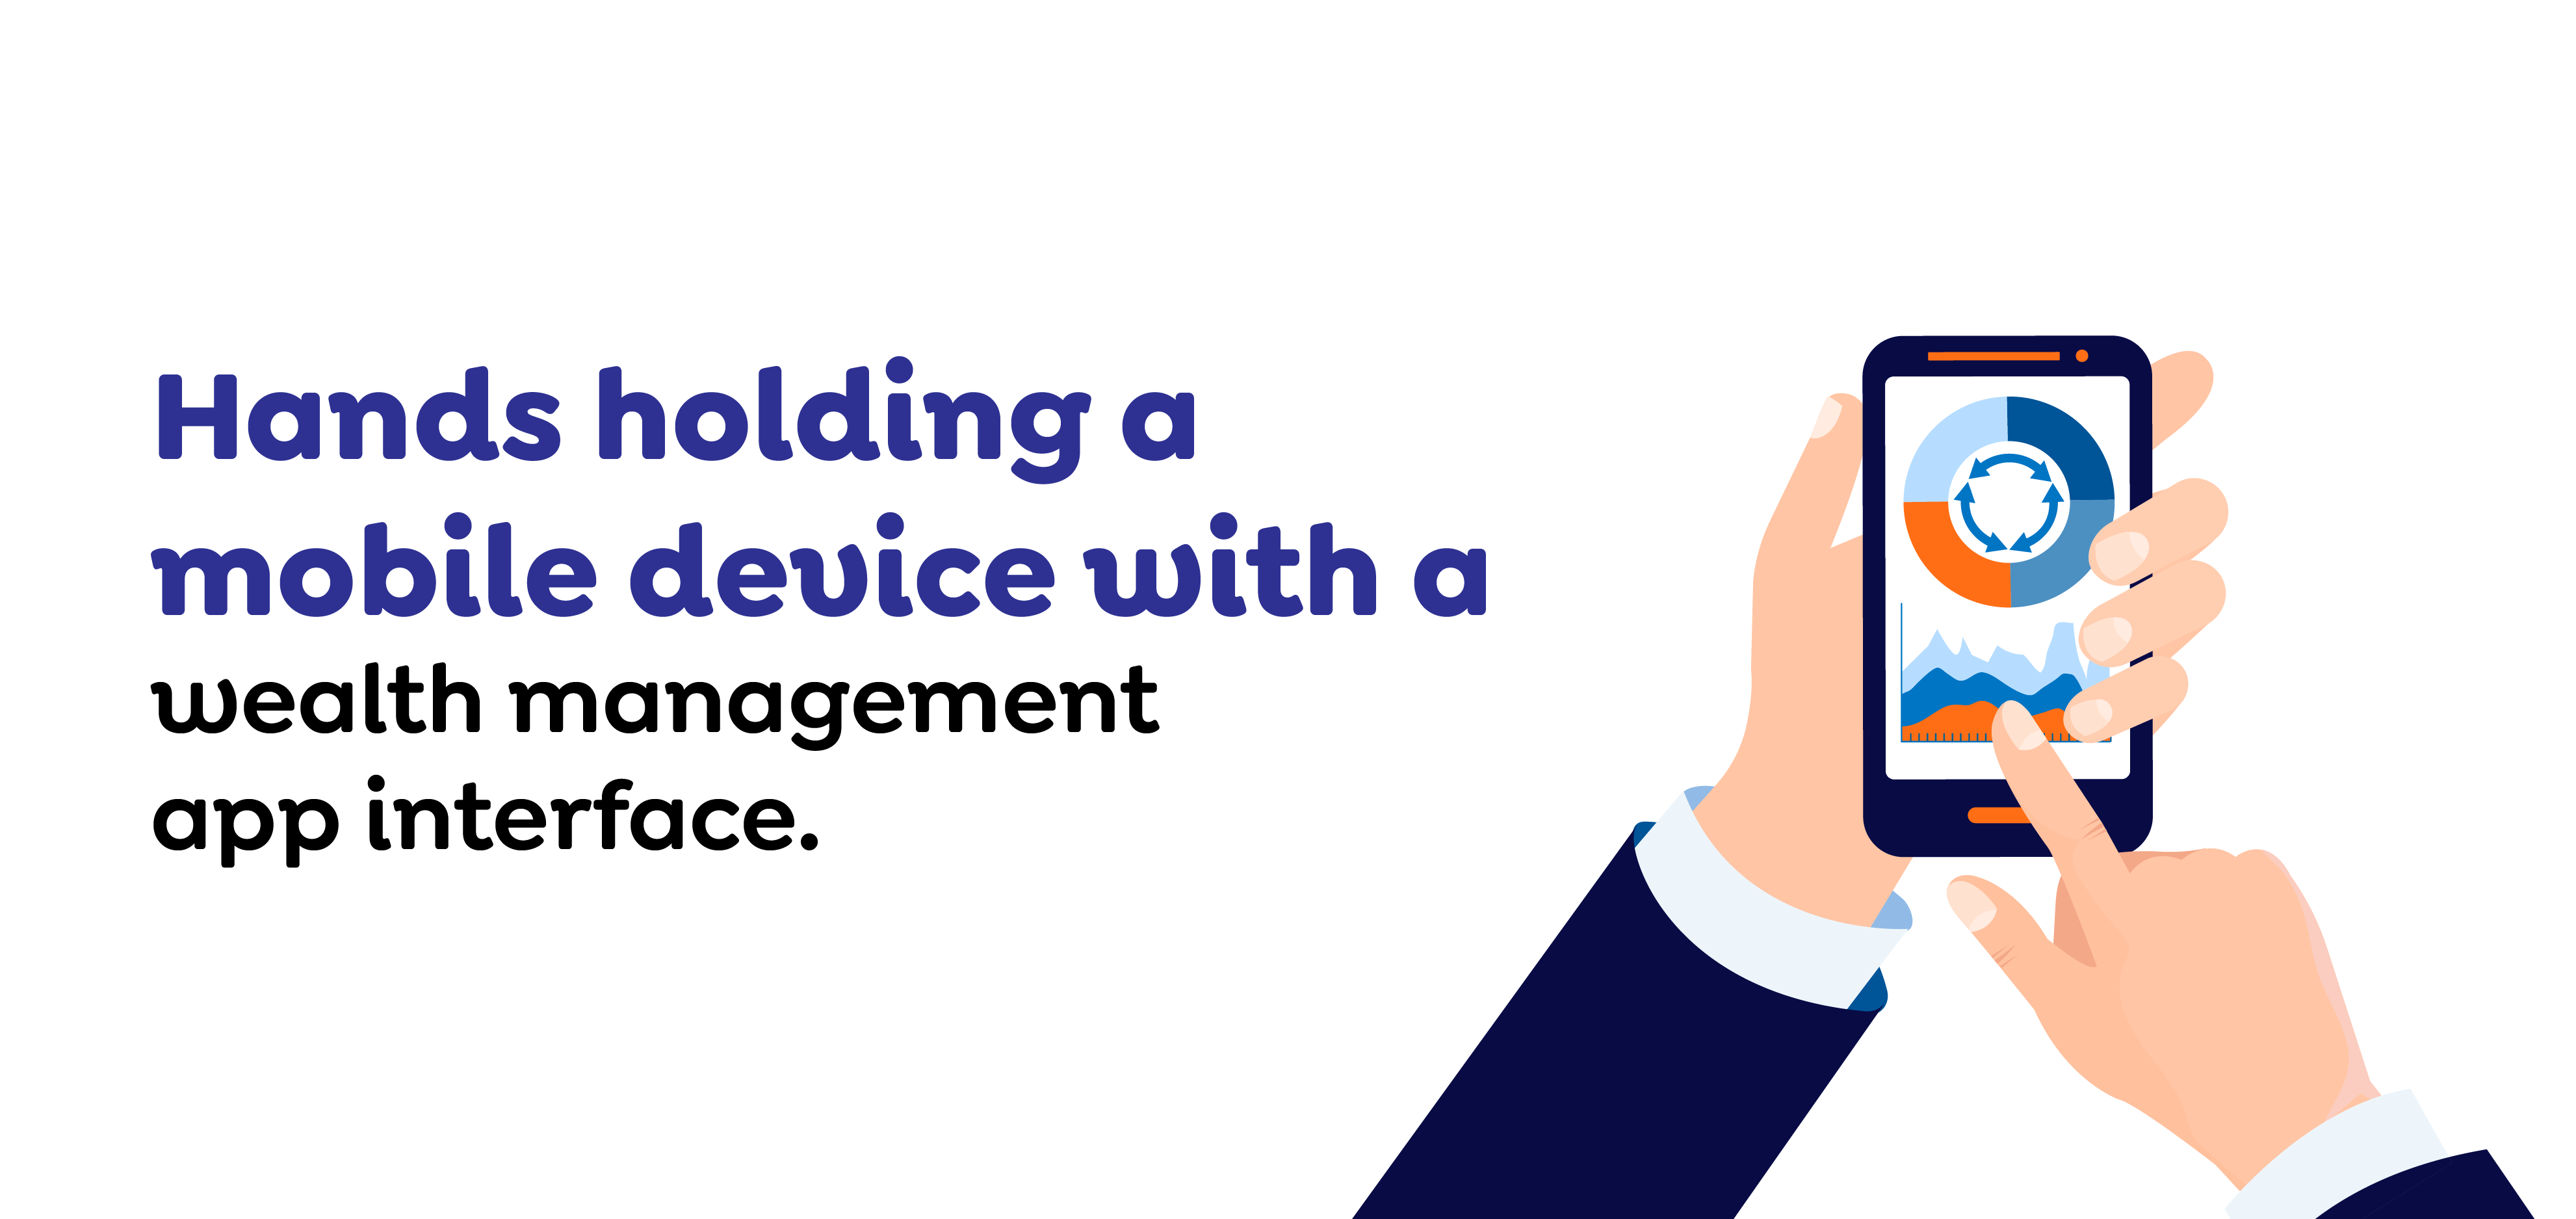 Hands holding a mobile device